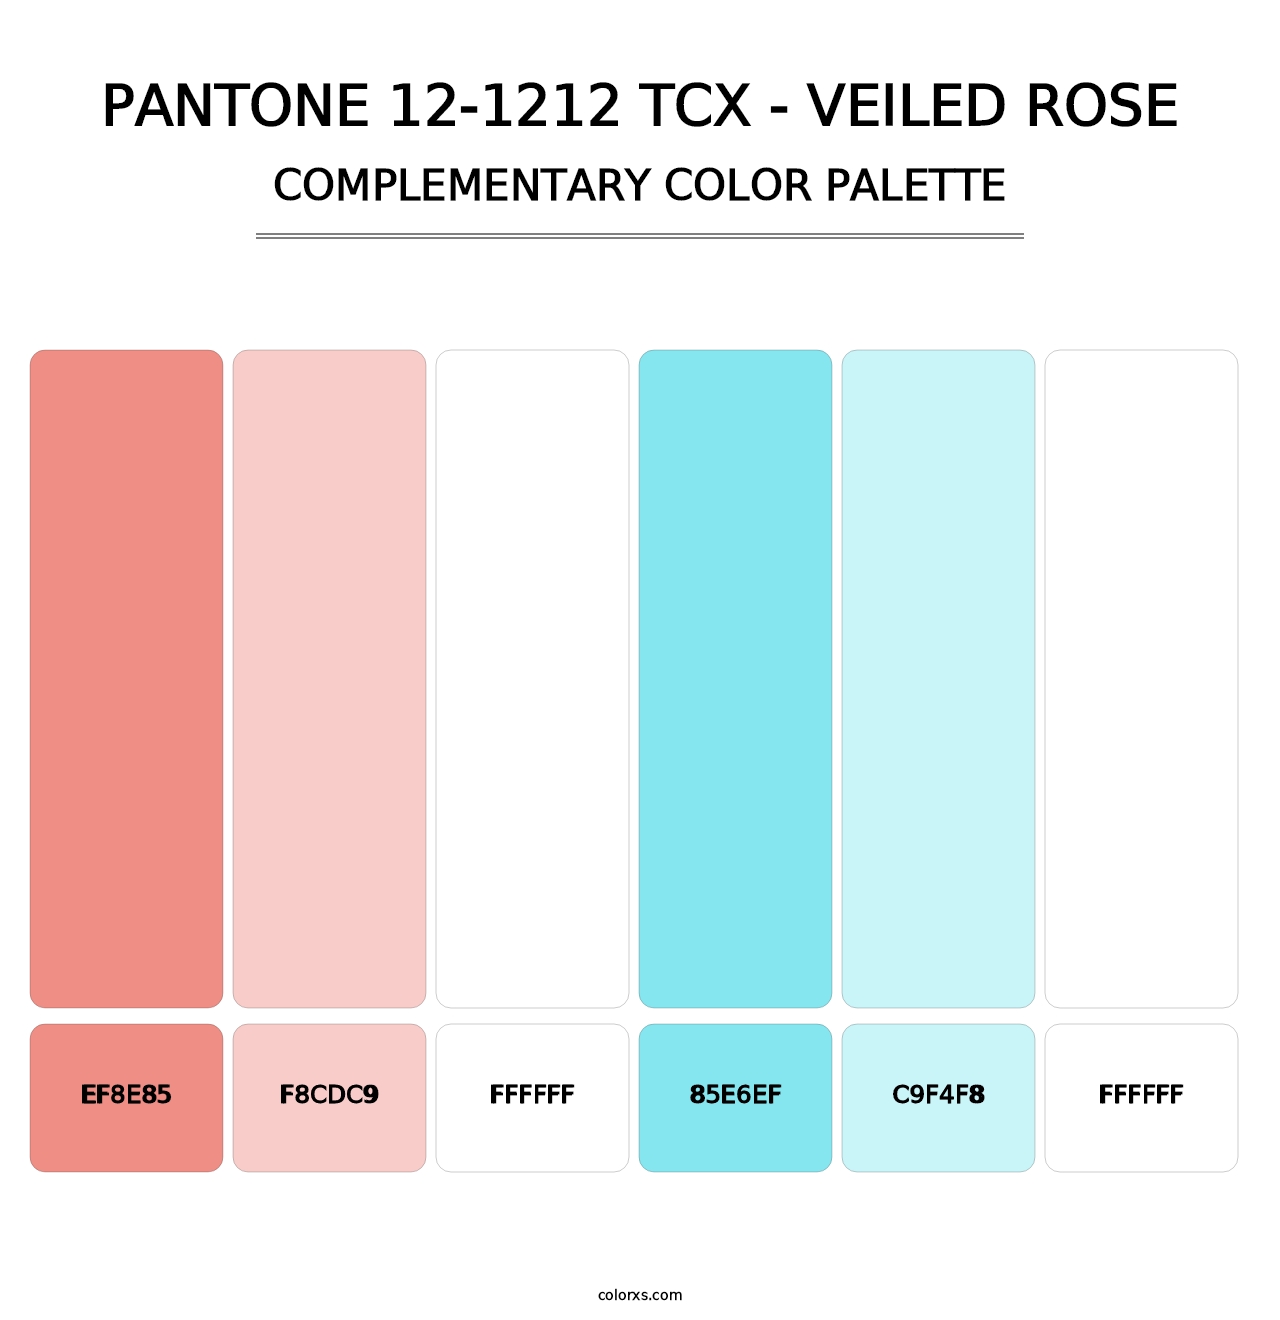 PANTONE 12-1212 TCX - Veiled Rose - Complementary Color Palette